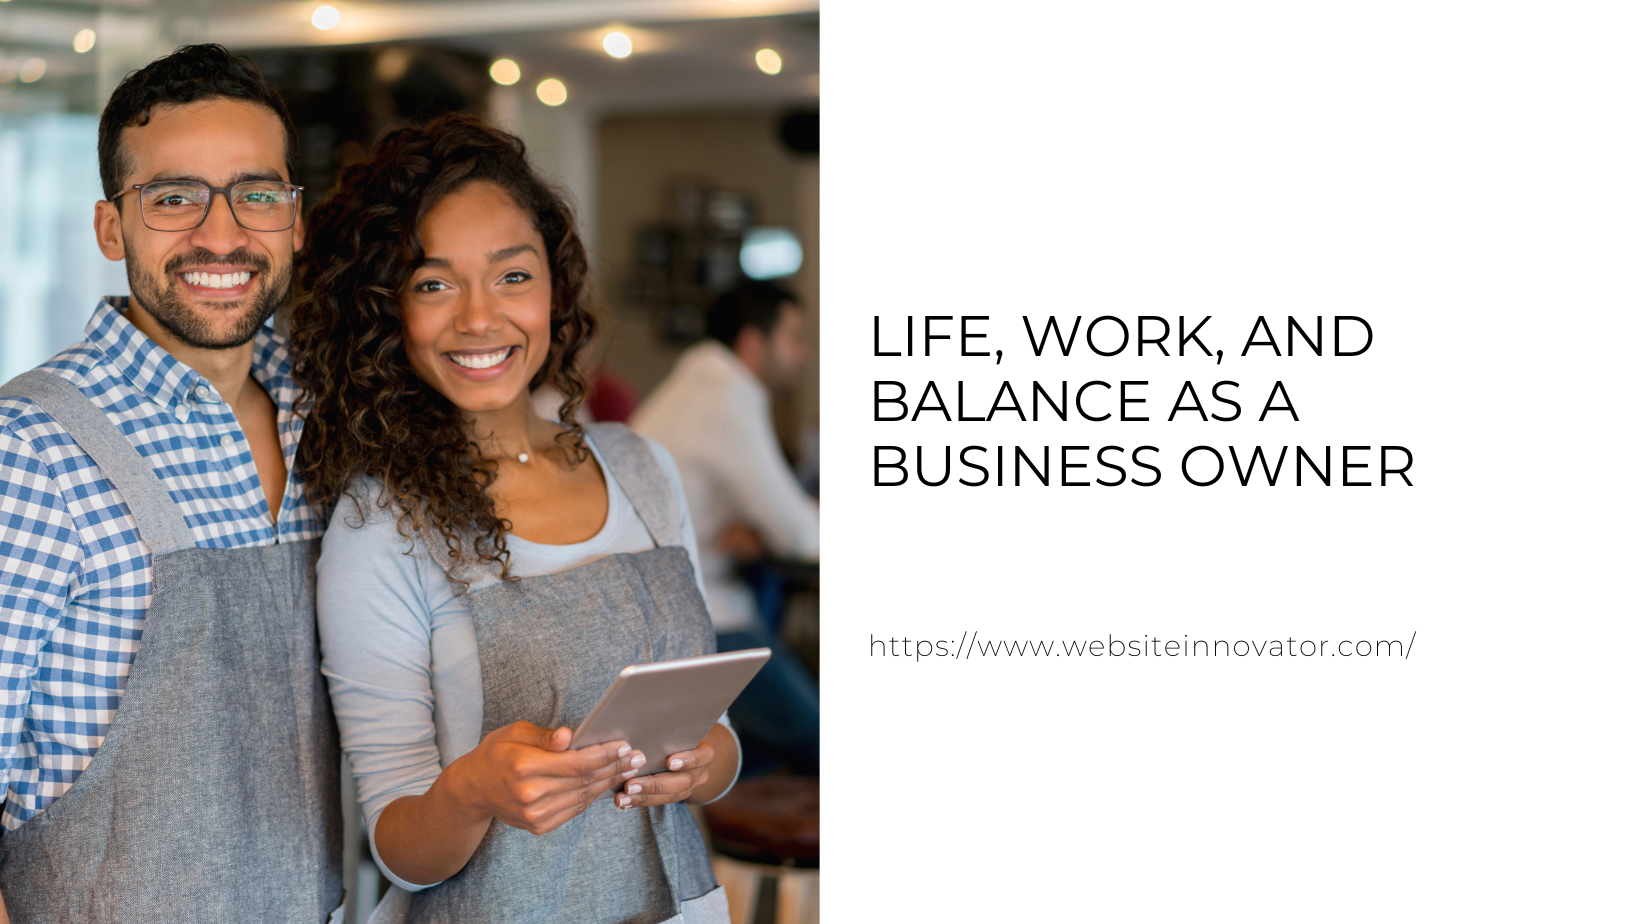 Life, Work, and Balance as a Business Owner